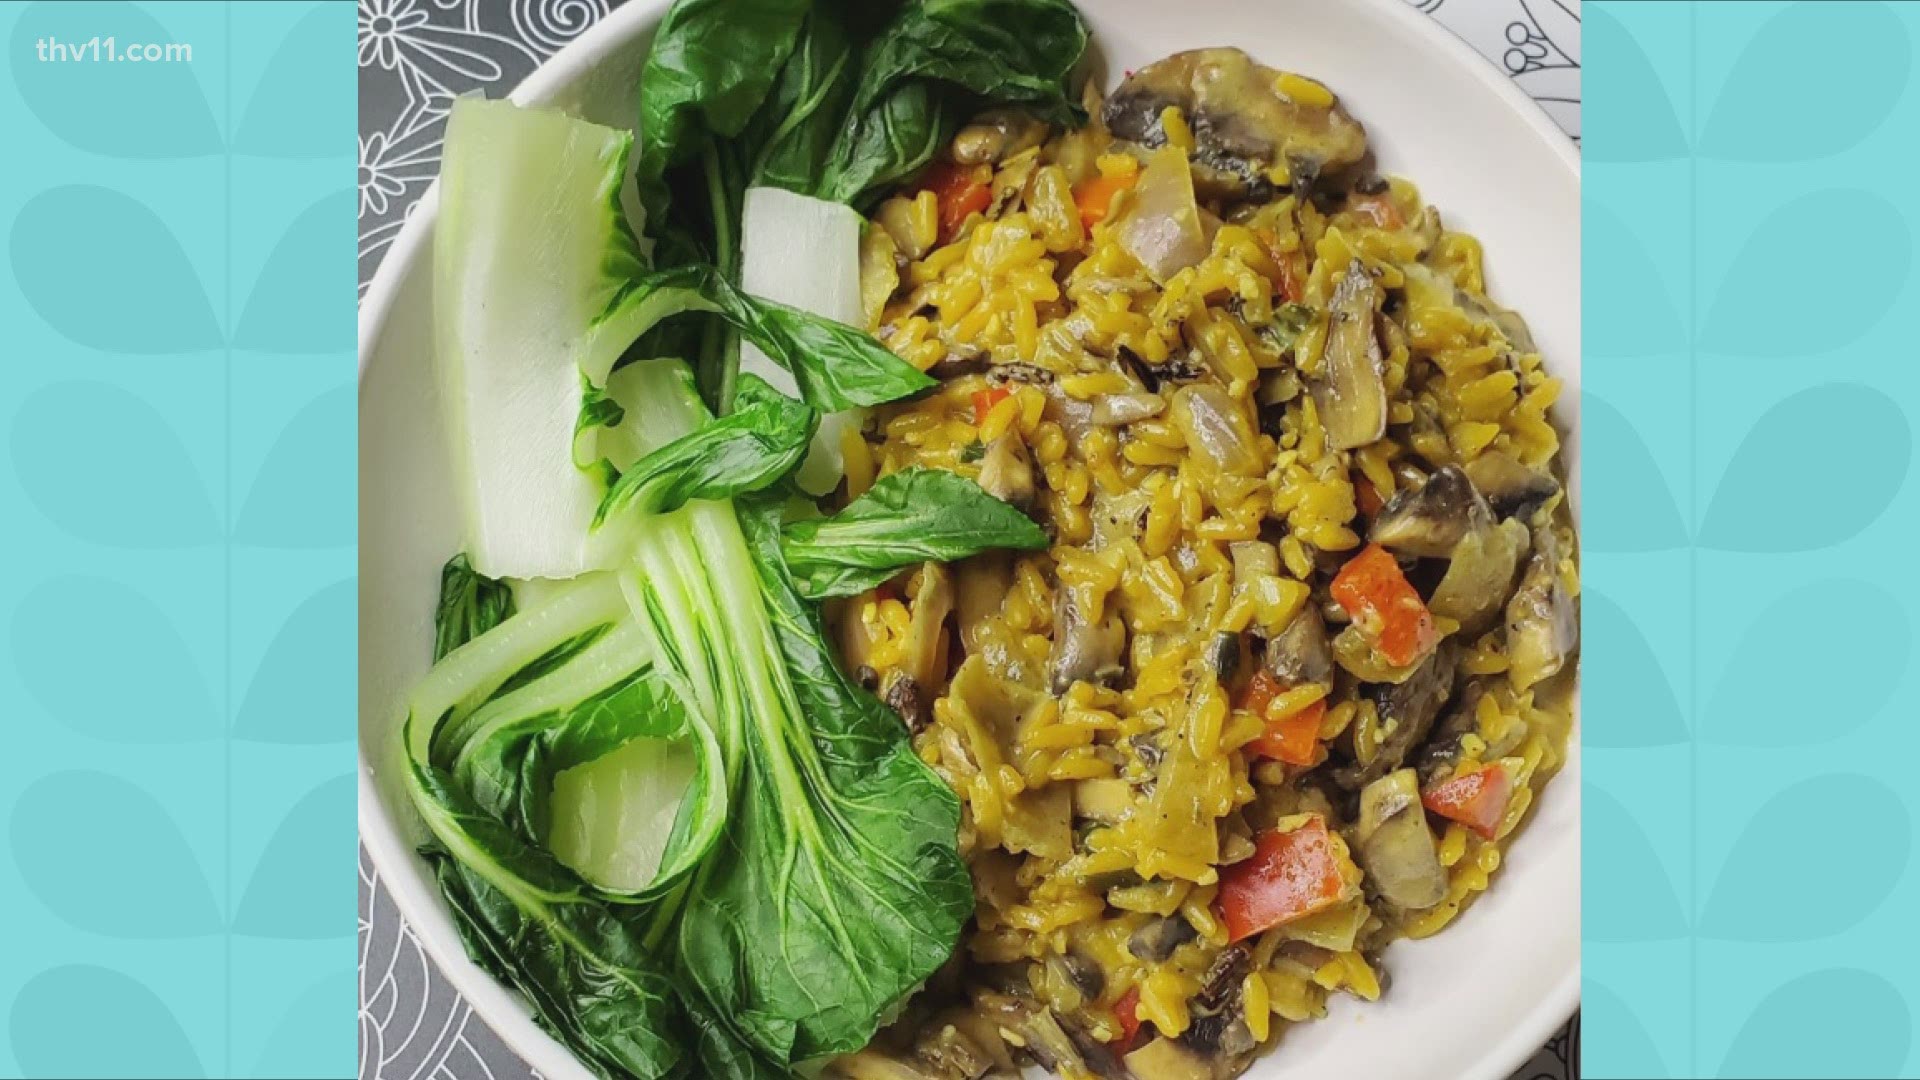 Dr. Tionna Jenkins with Plate it Healthy shares a vegan wild rice and mushroom soup recipe.